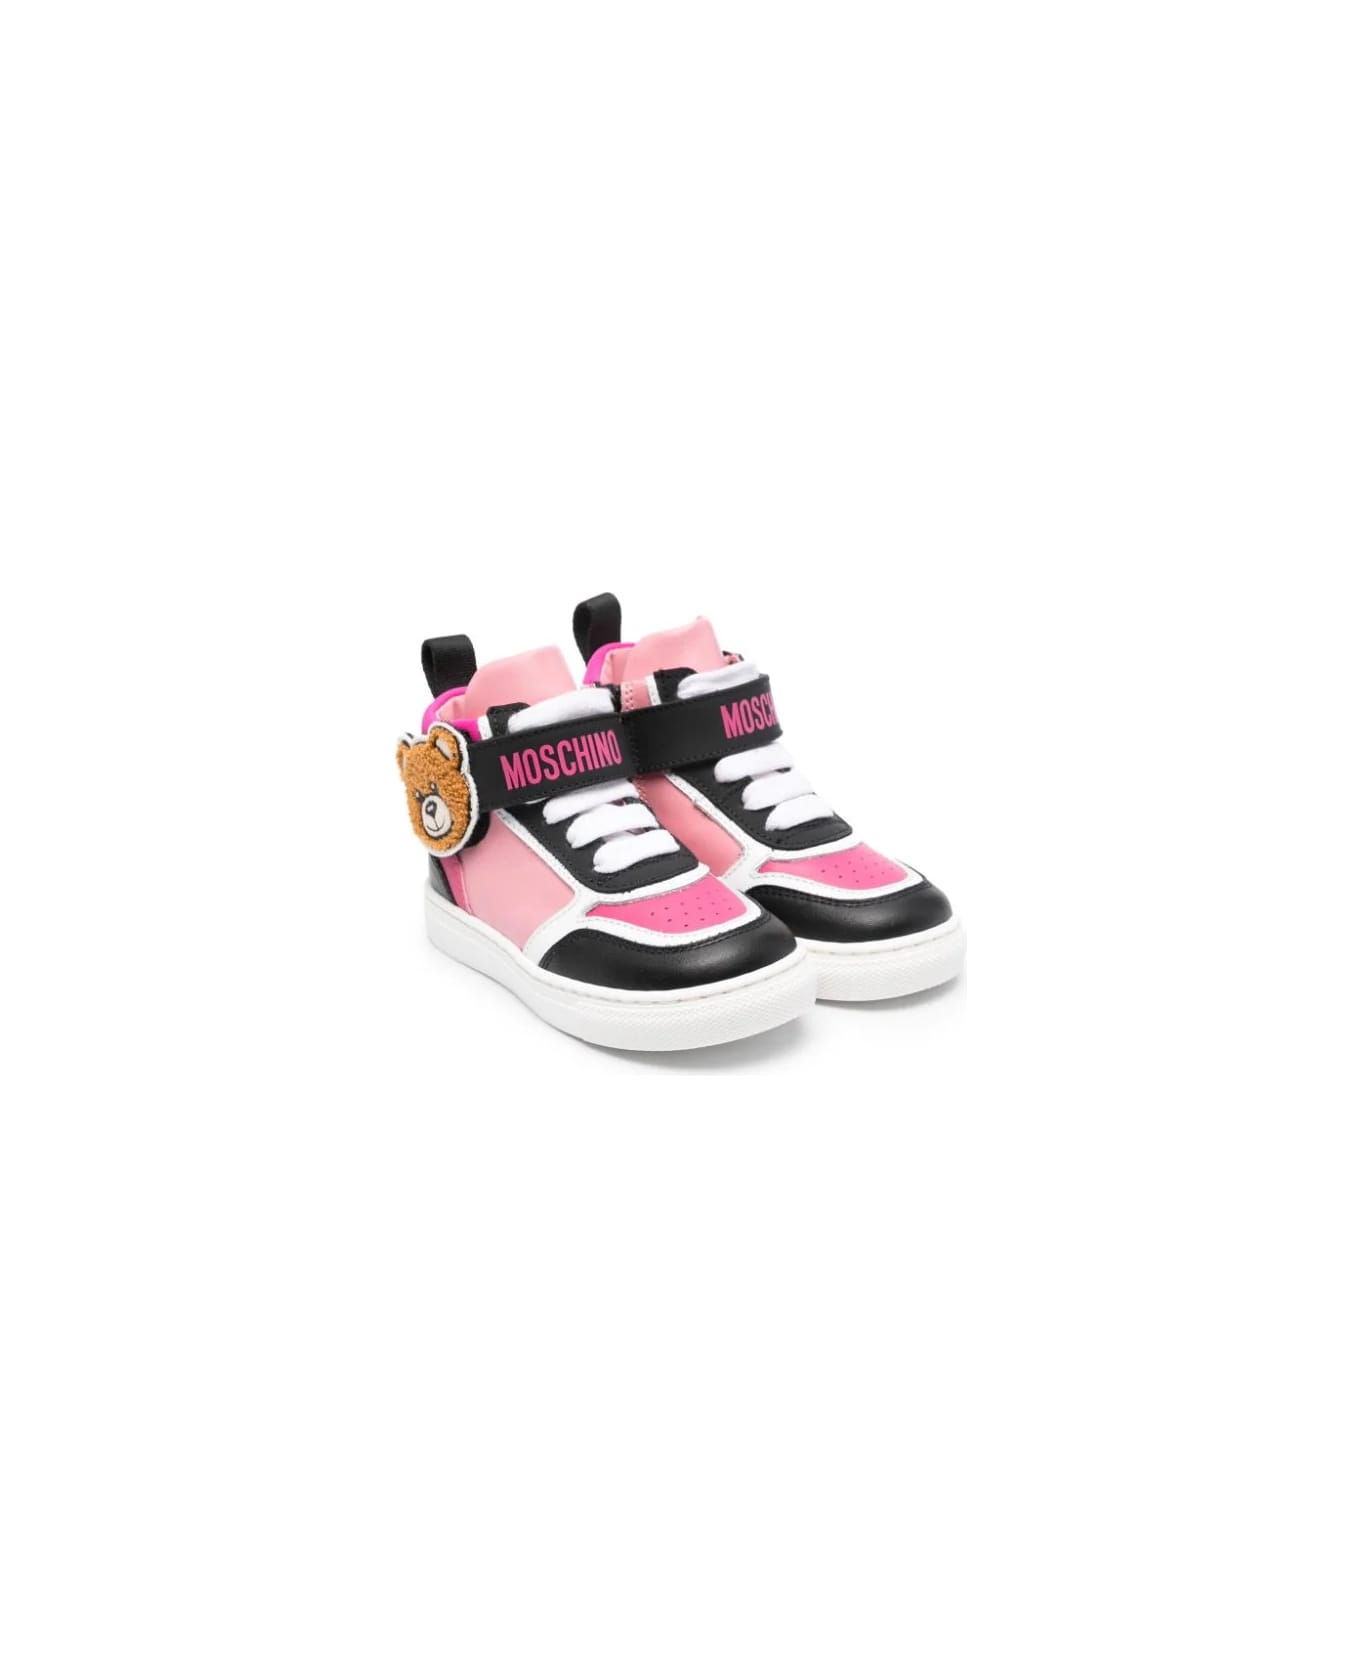 Moschino Sneakers Alte - Pink